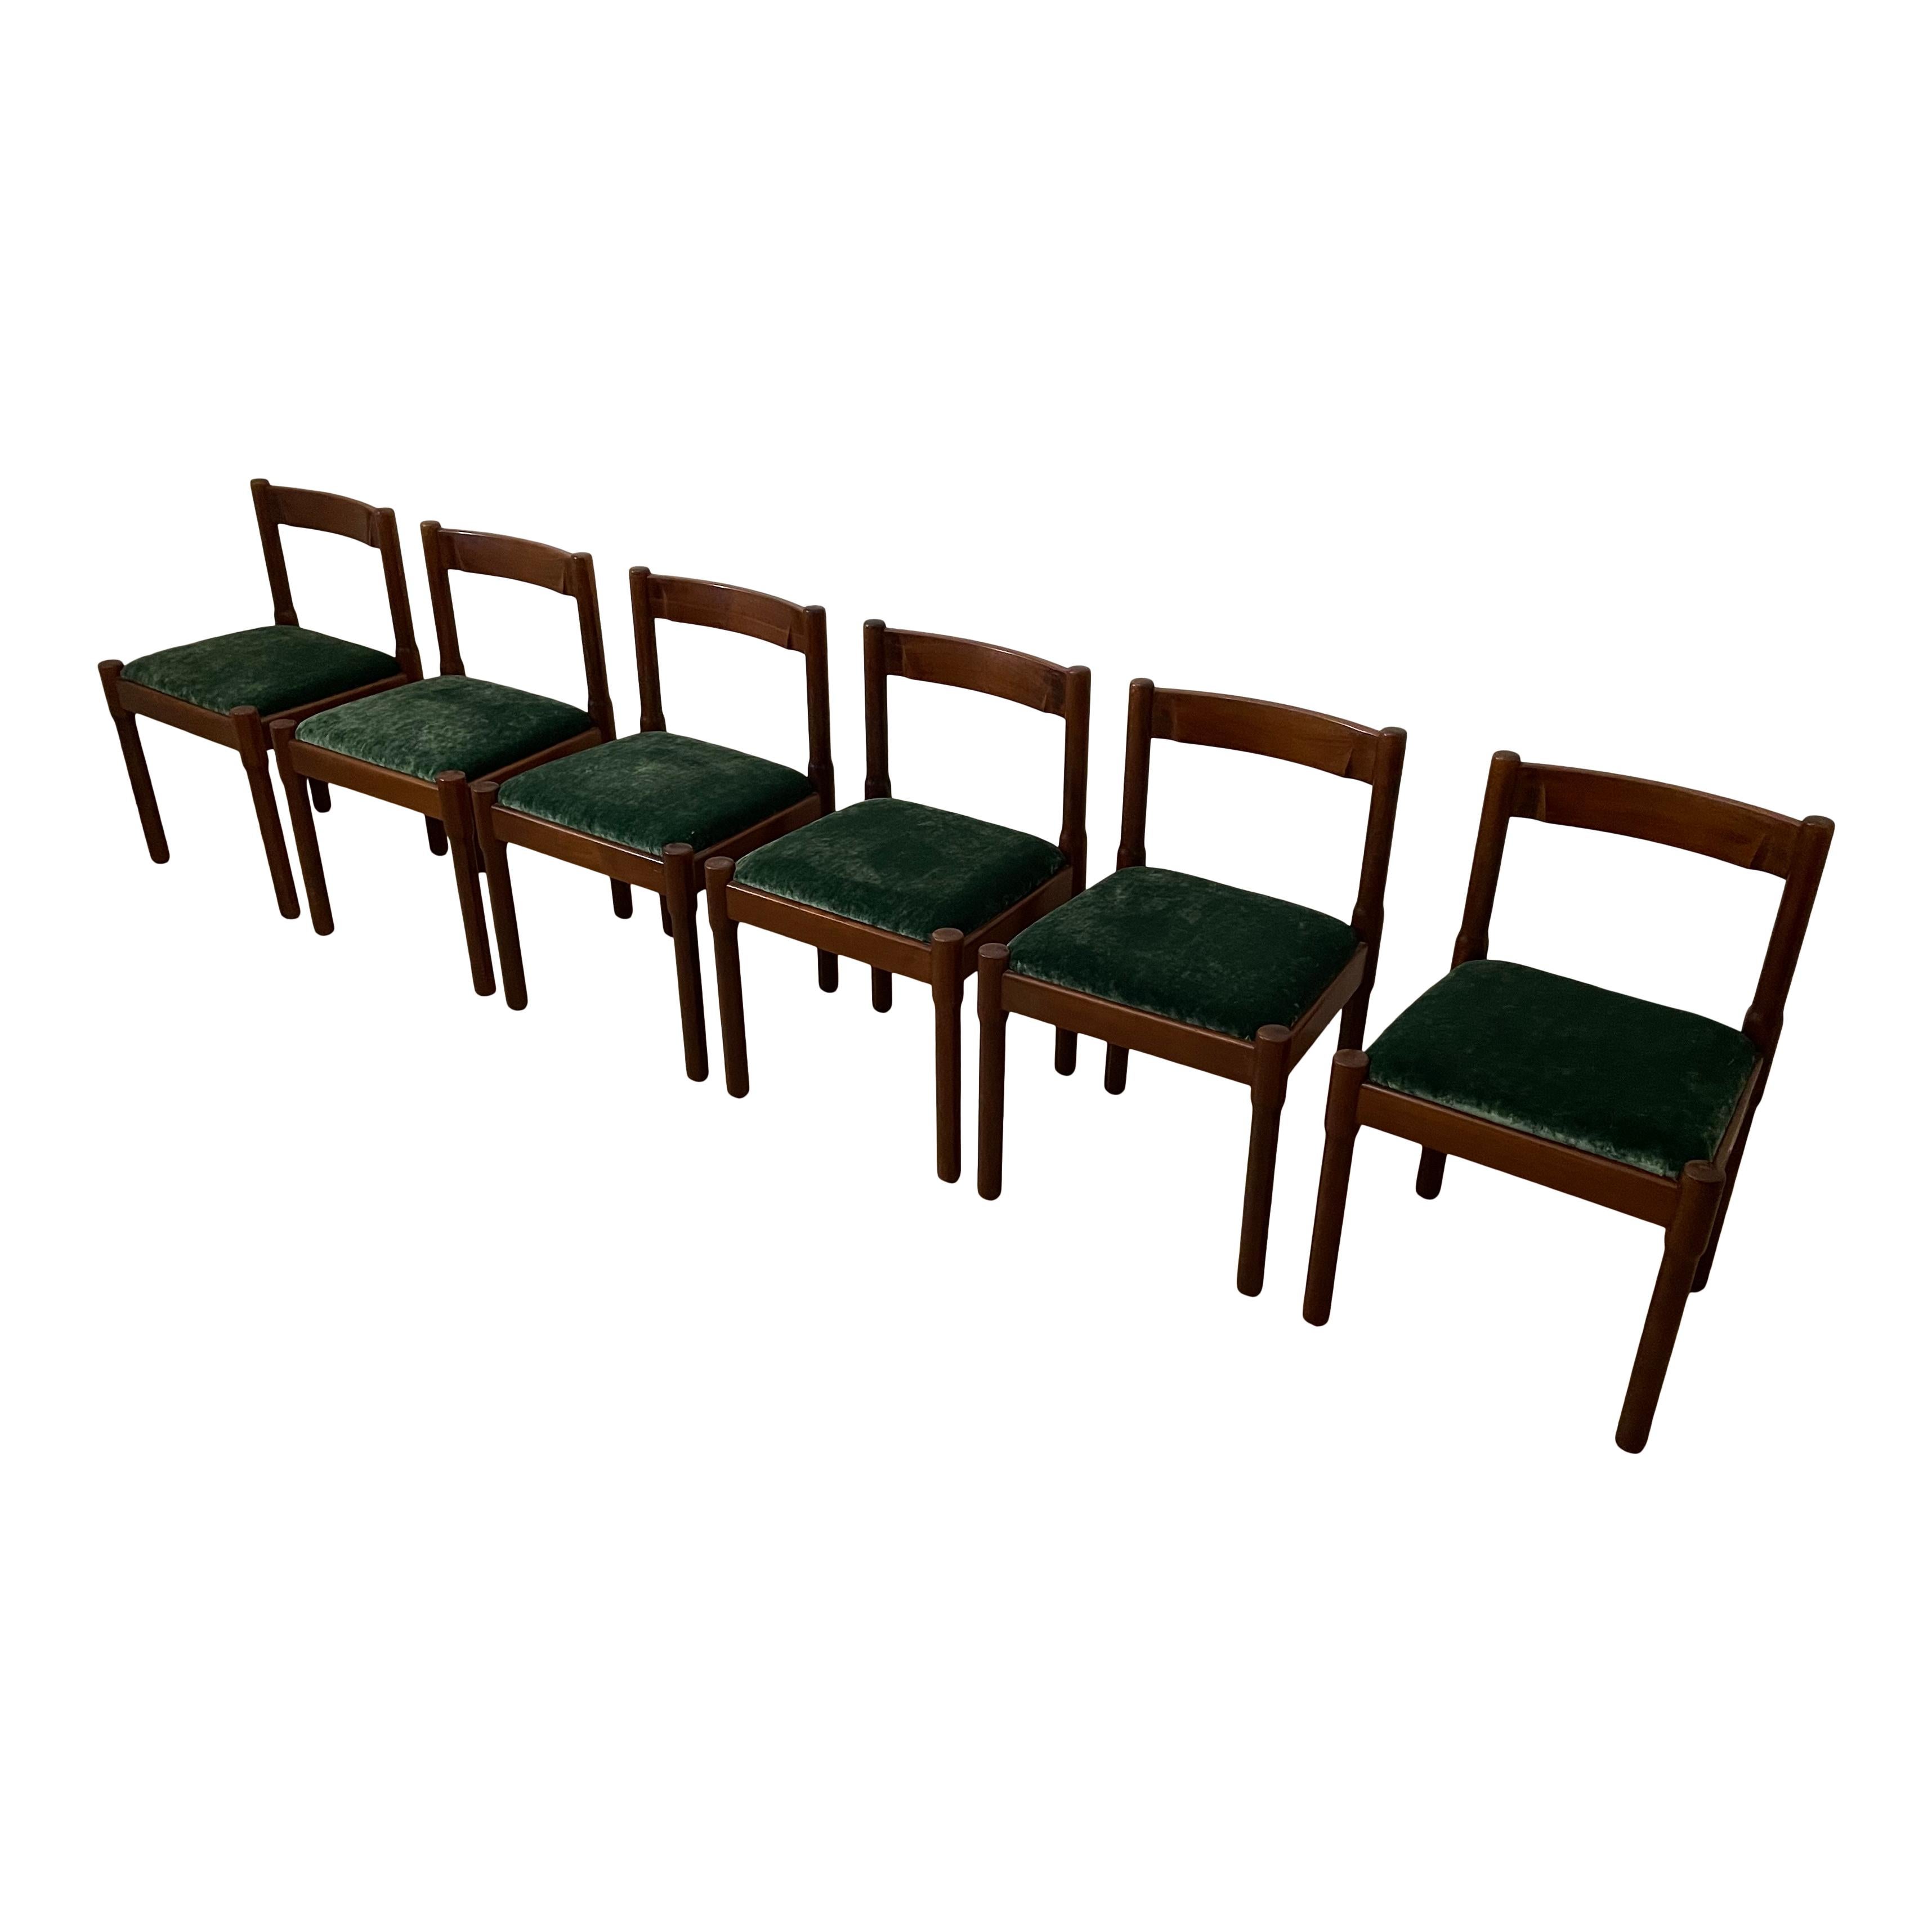 Italian Vico Magistretti Midcentury “Carimate” Dining Chair for Cassina, 1963, Set of 8 For Sale